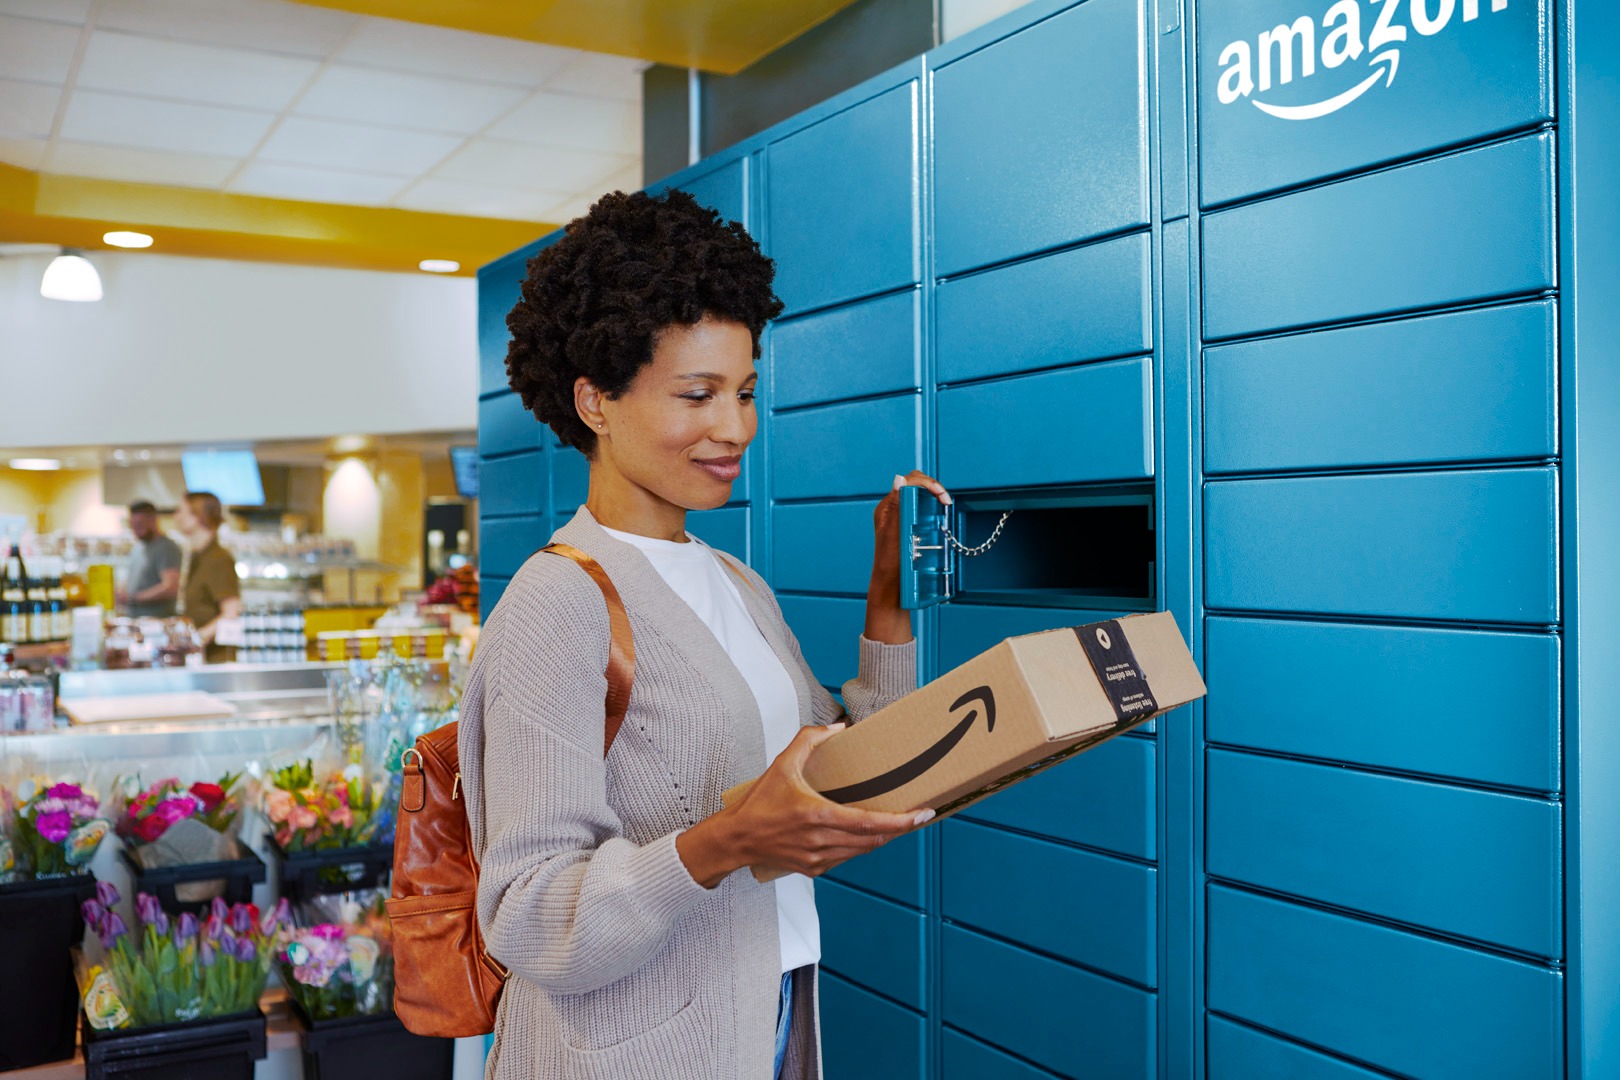 What Are Amazon Lockers And Hubs?